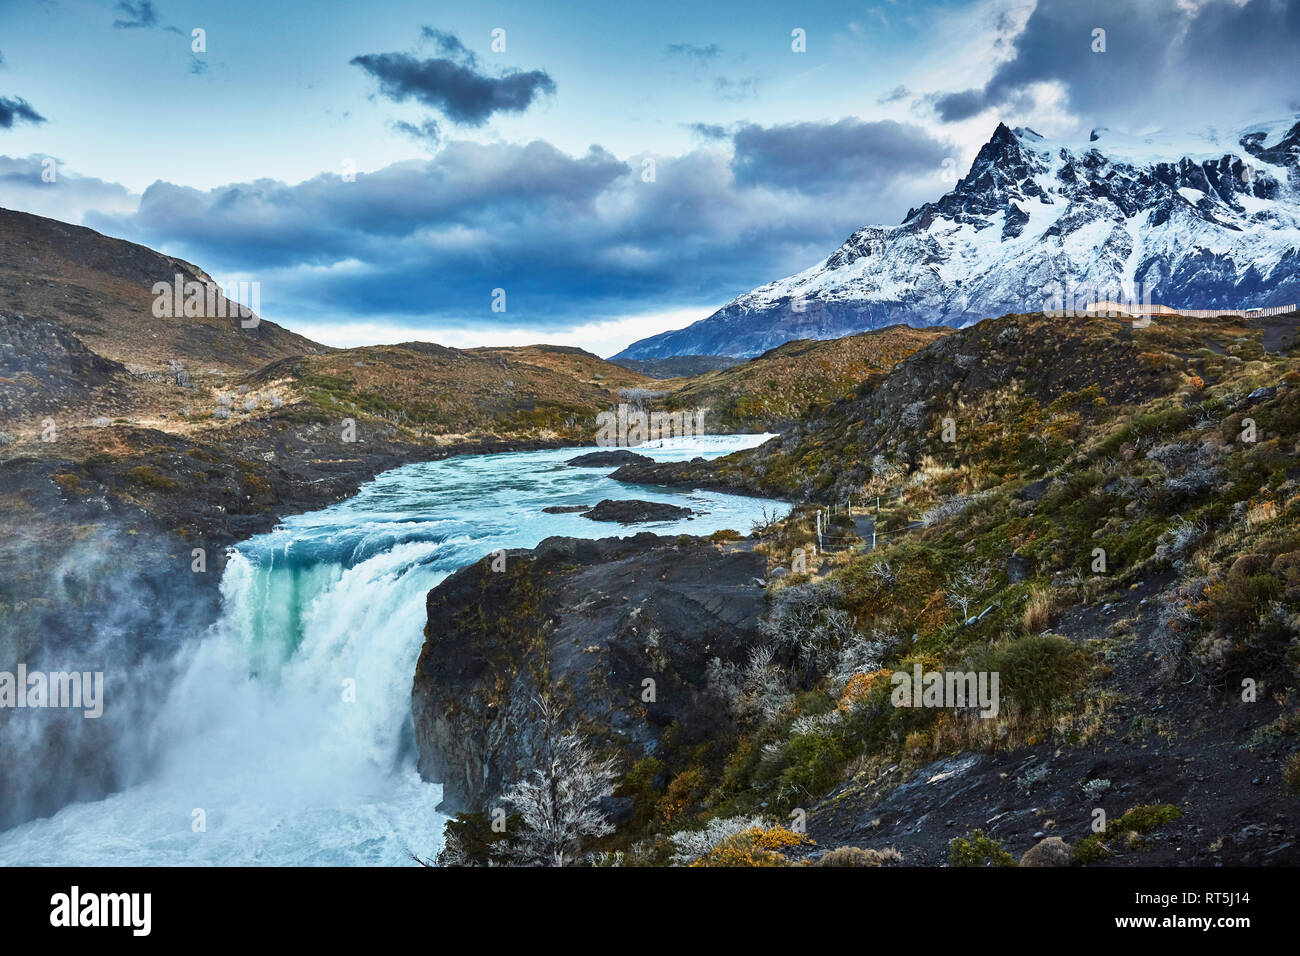 Chile, Torres del Paine National park, Cascada del Rio Paine, Salto Grande Waterfall in front of Torres del Paine massif Stock Photo